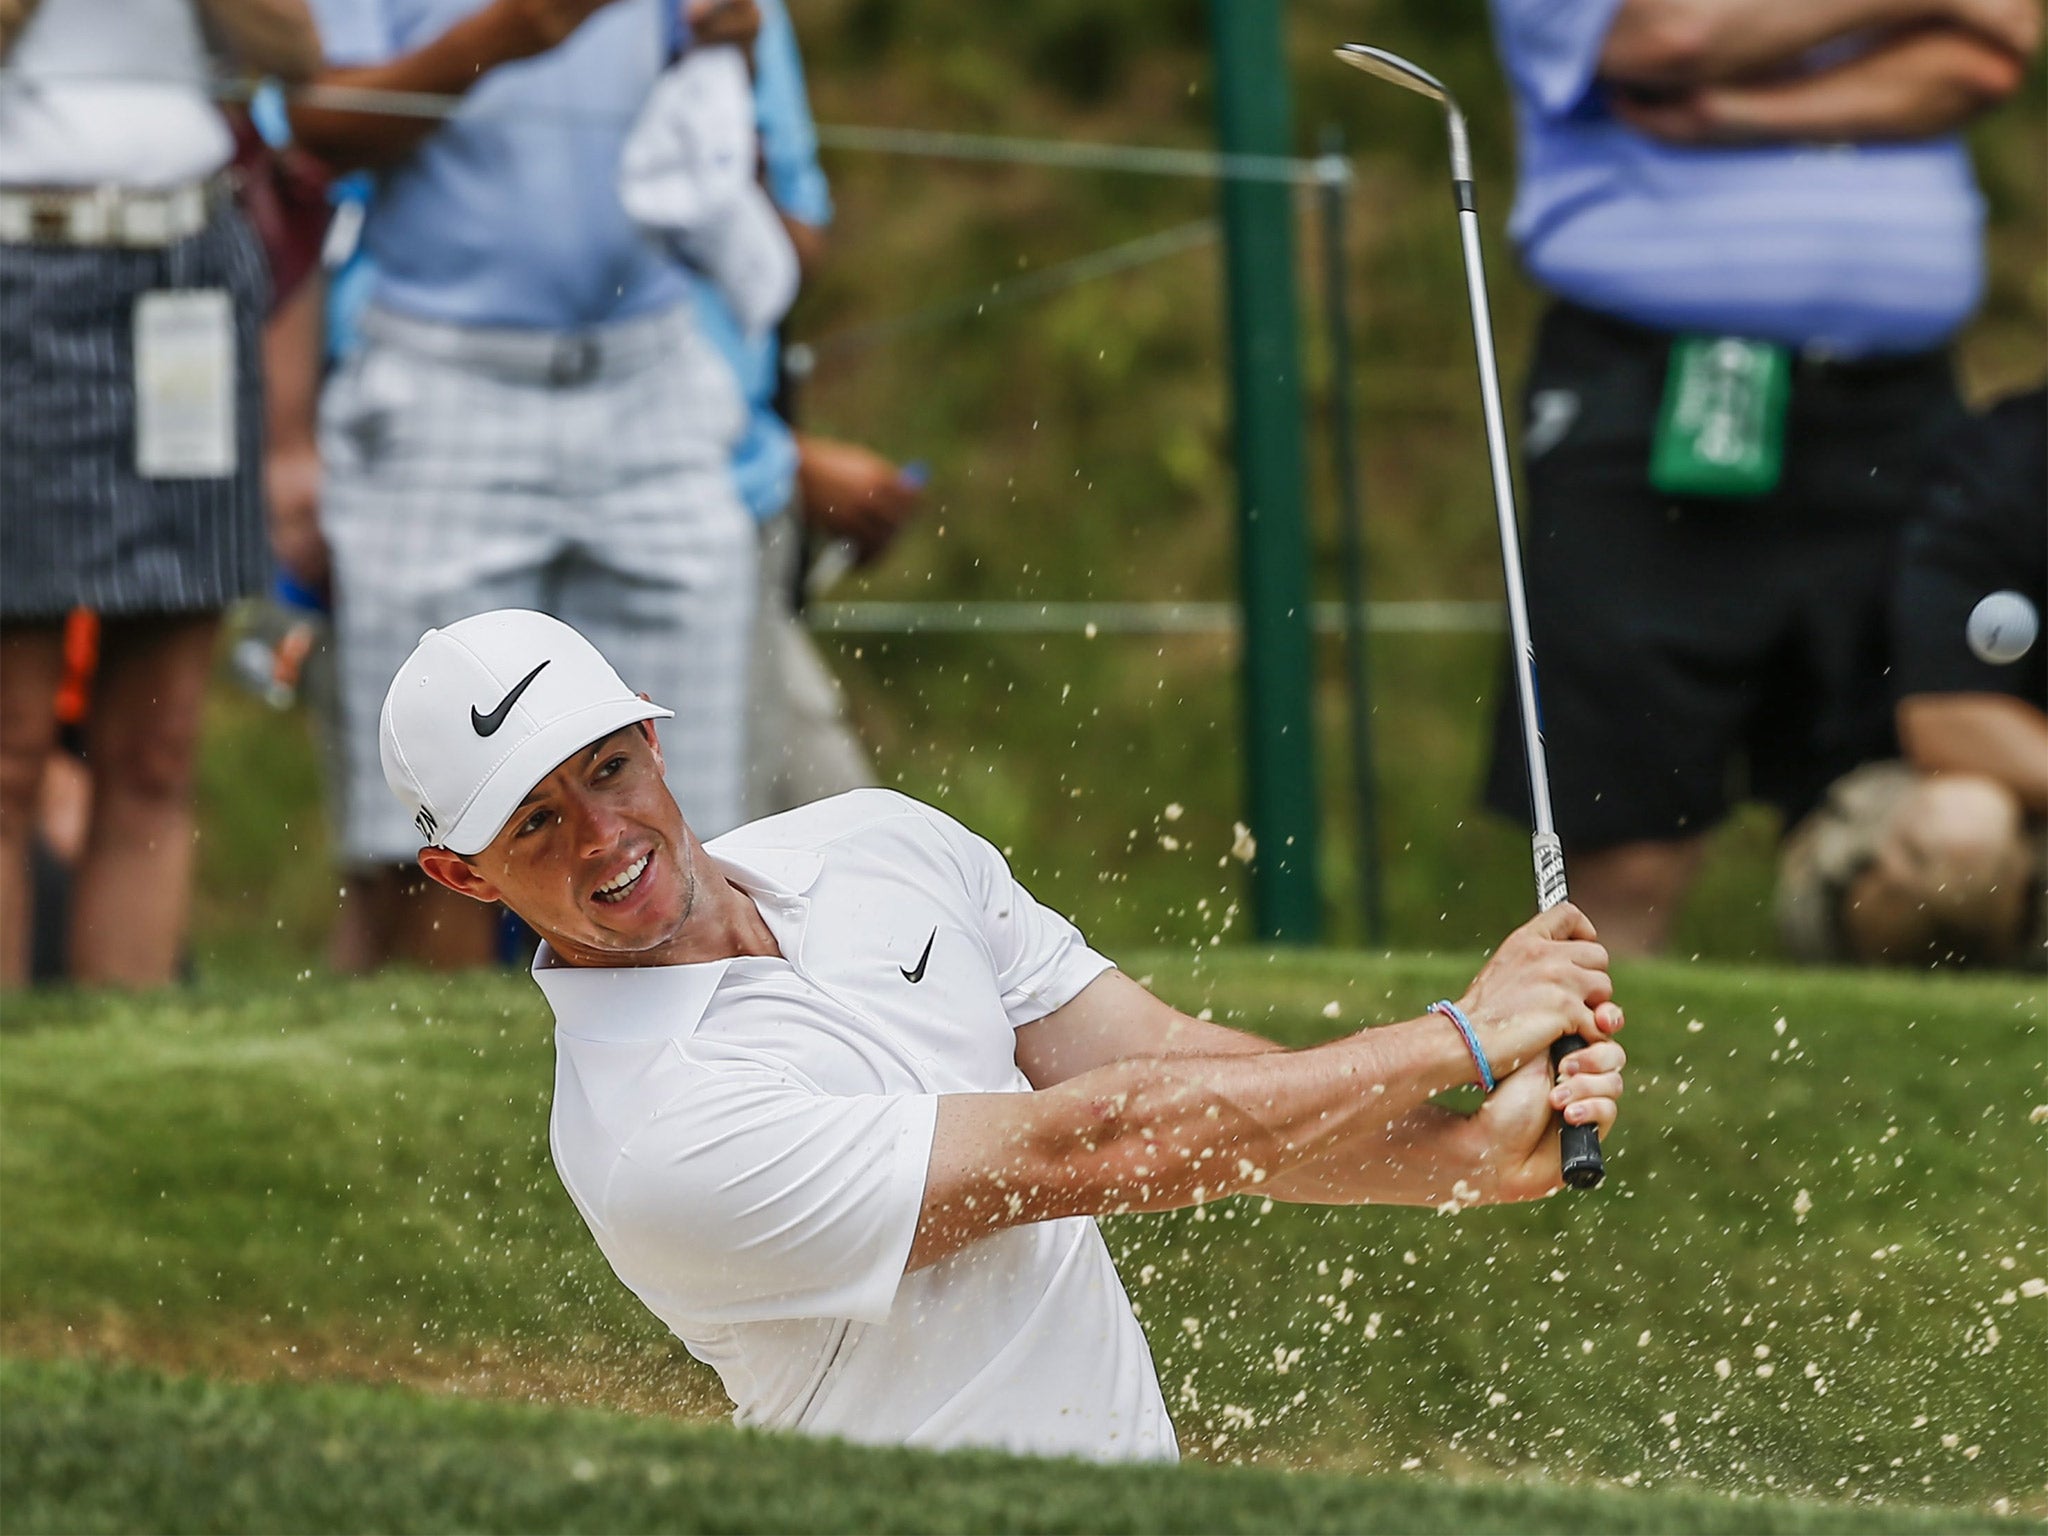 Rory McIlroy plays out of a bunker during a practice round at Valhalla